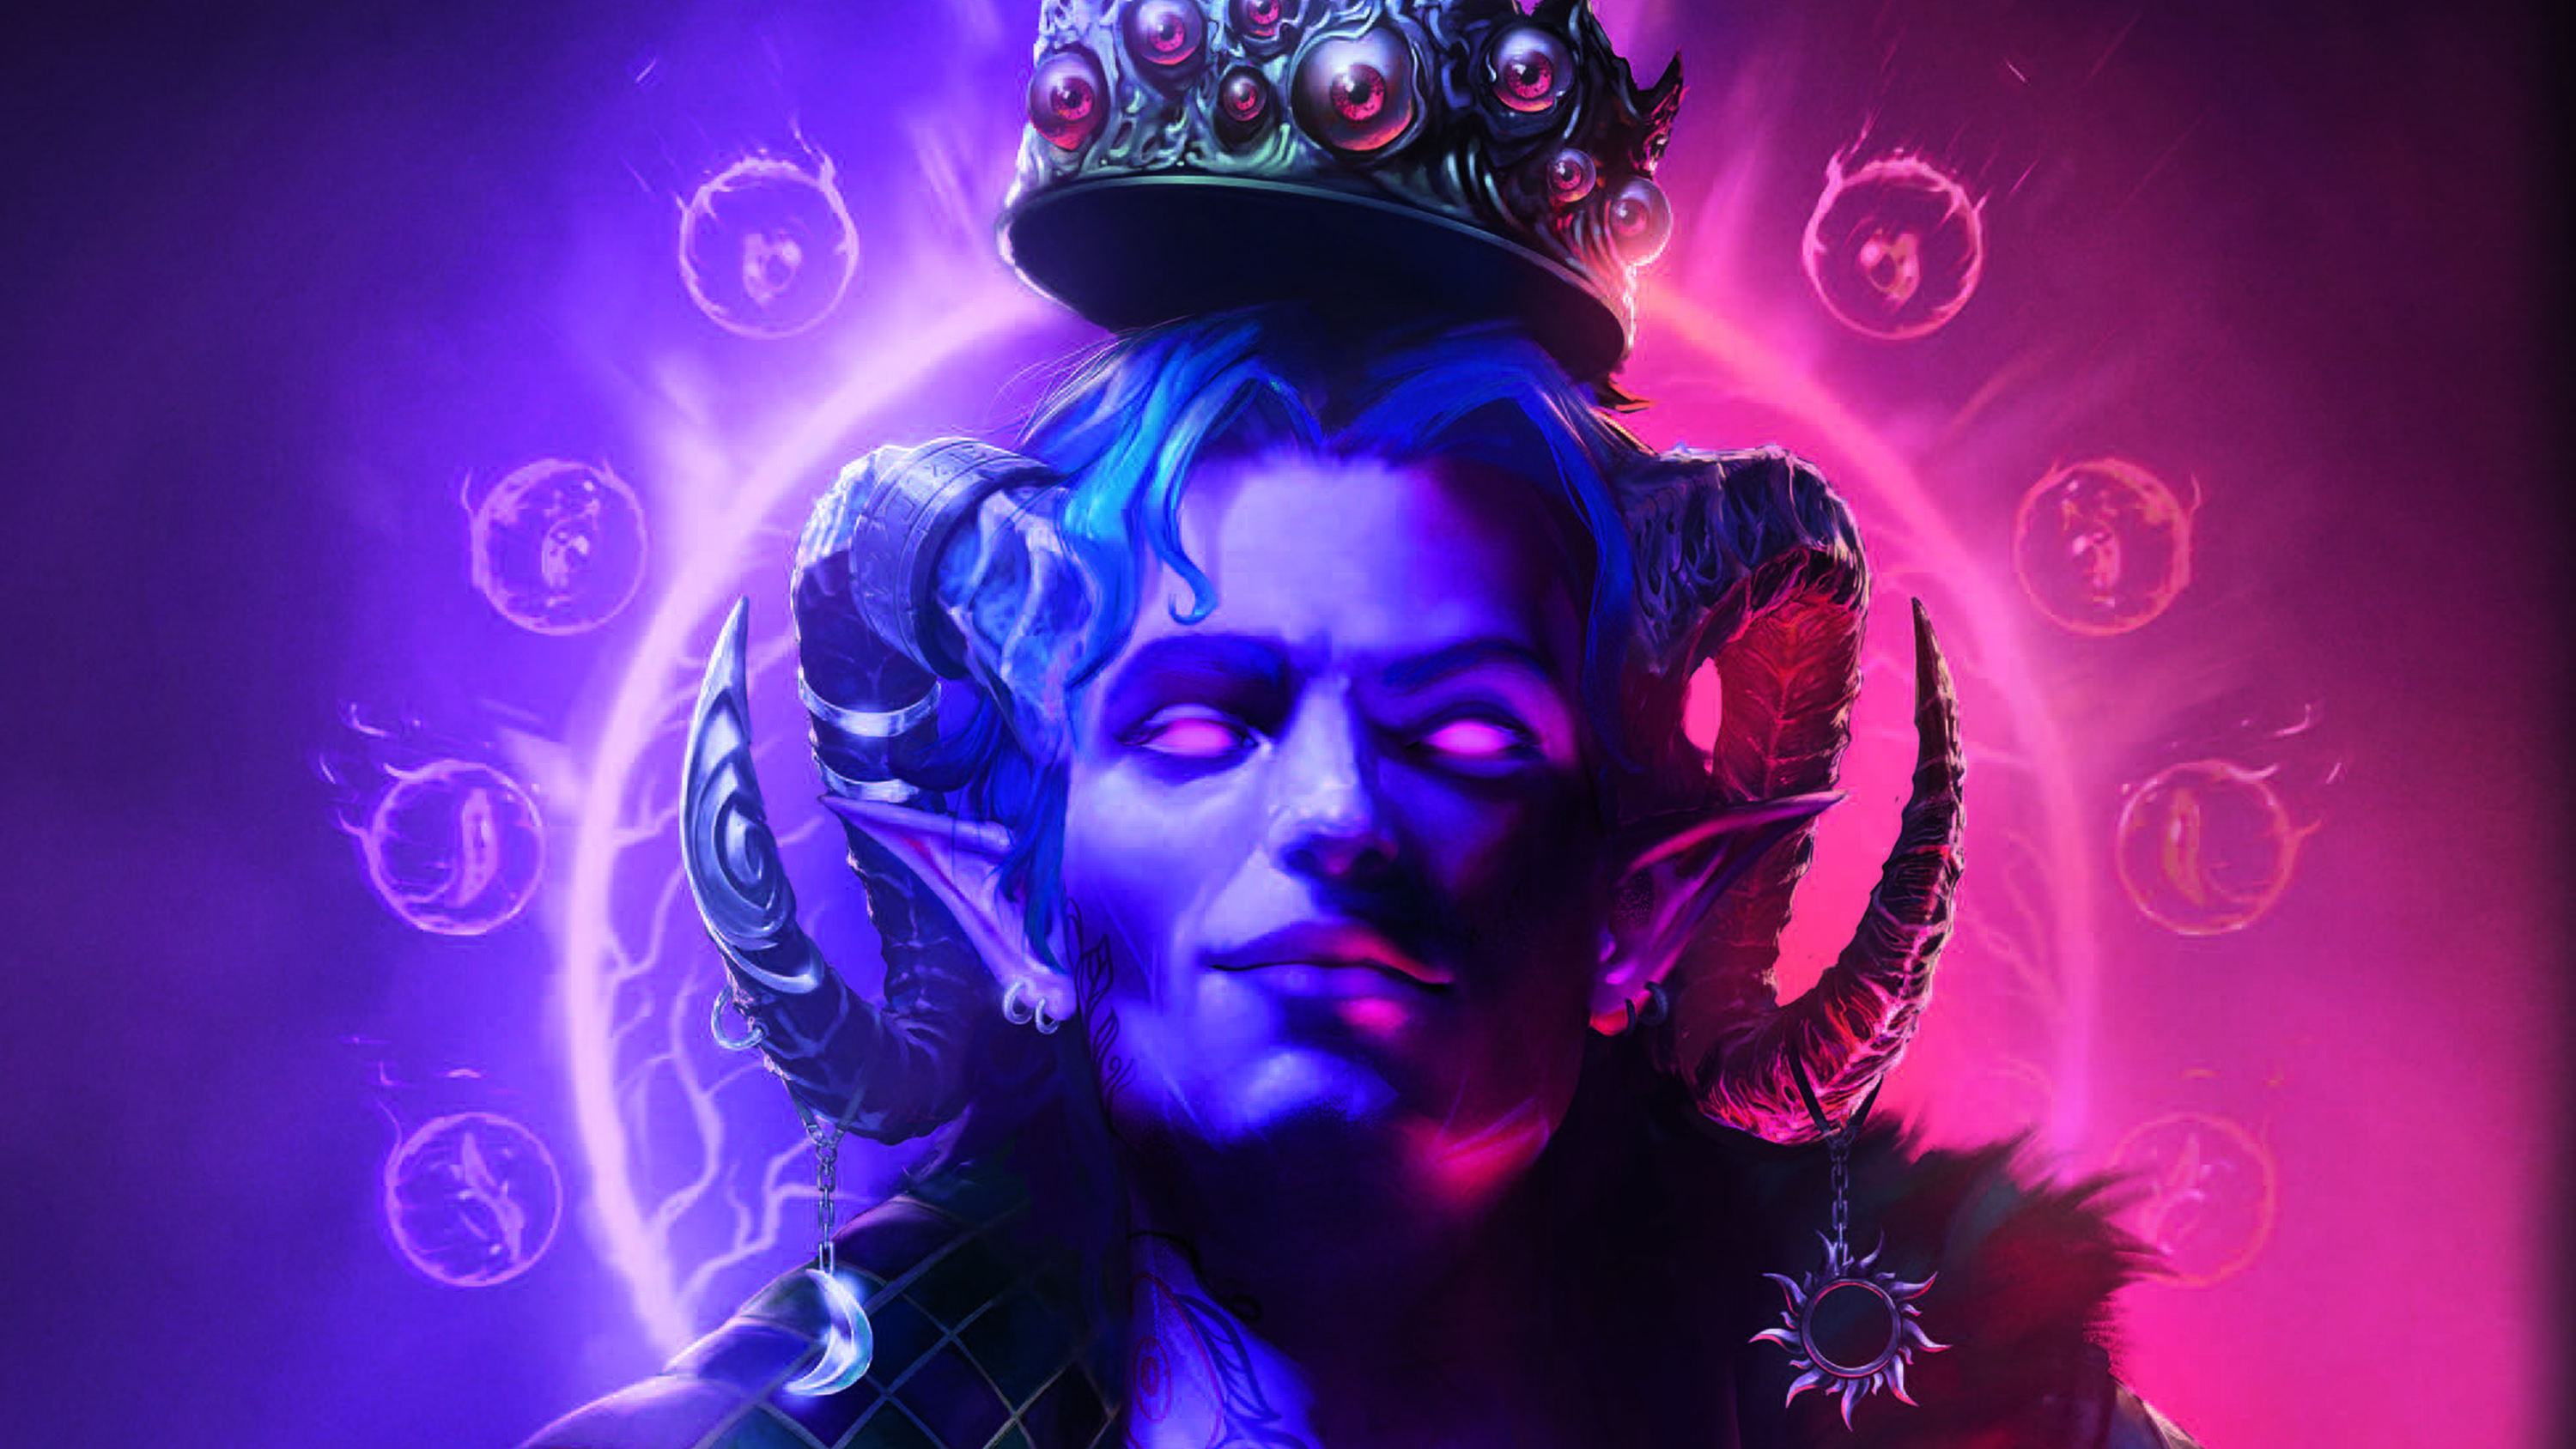 Cover art from The Nine Eyes of Lucien, a Critical Role novel about the Mighty Nein, shows a tiefling with purple eyes and a crown floating over his head. The crown has nine gem-like eyes. In the background, in pinks and purple, is a mystical sigil mirroring the shape of the eyes on the crown.